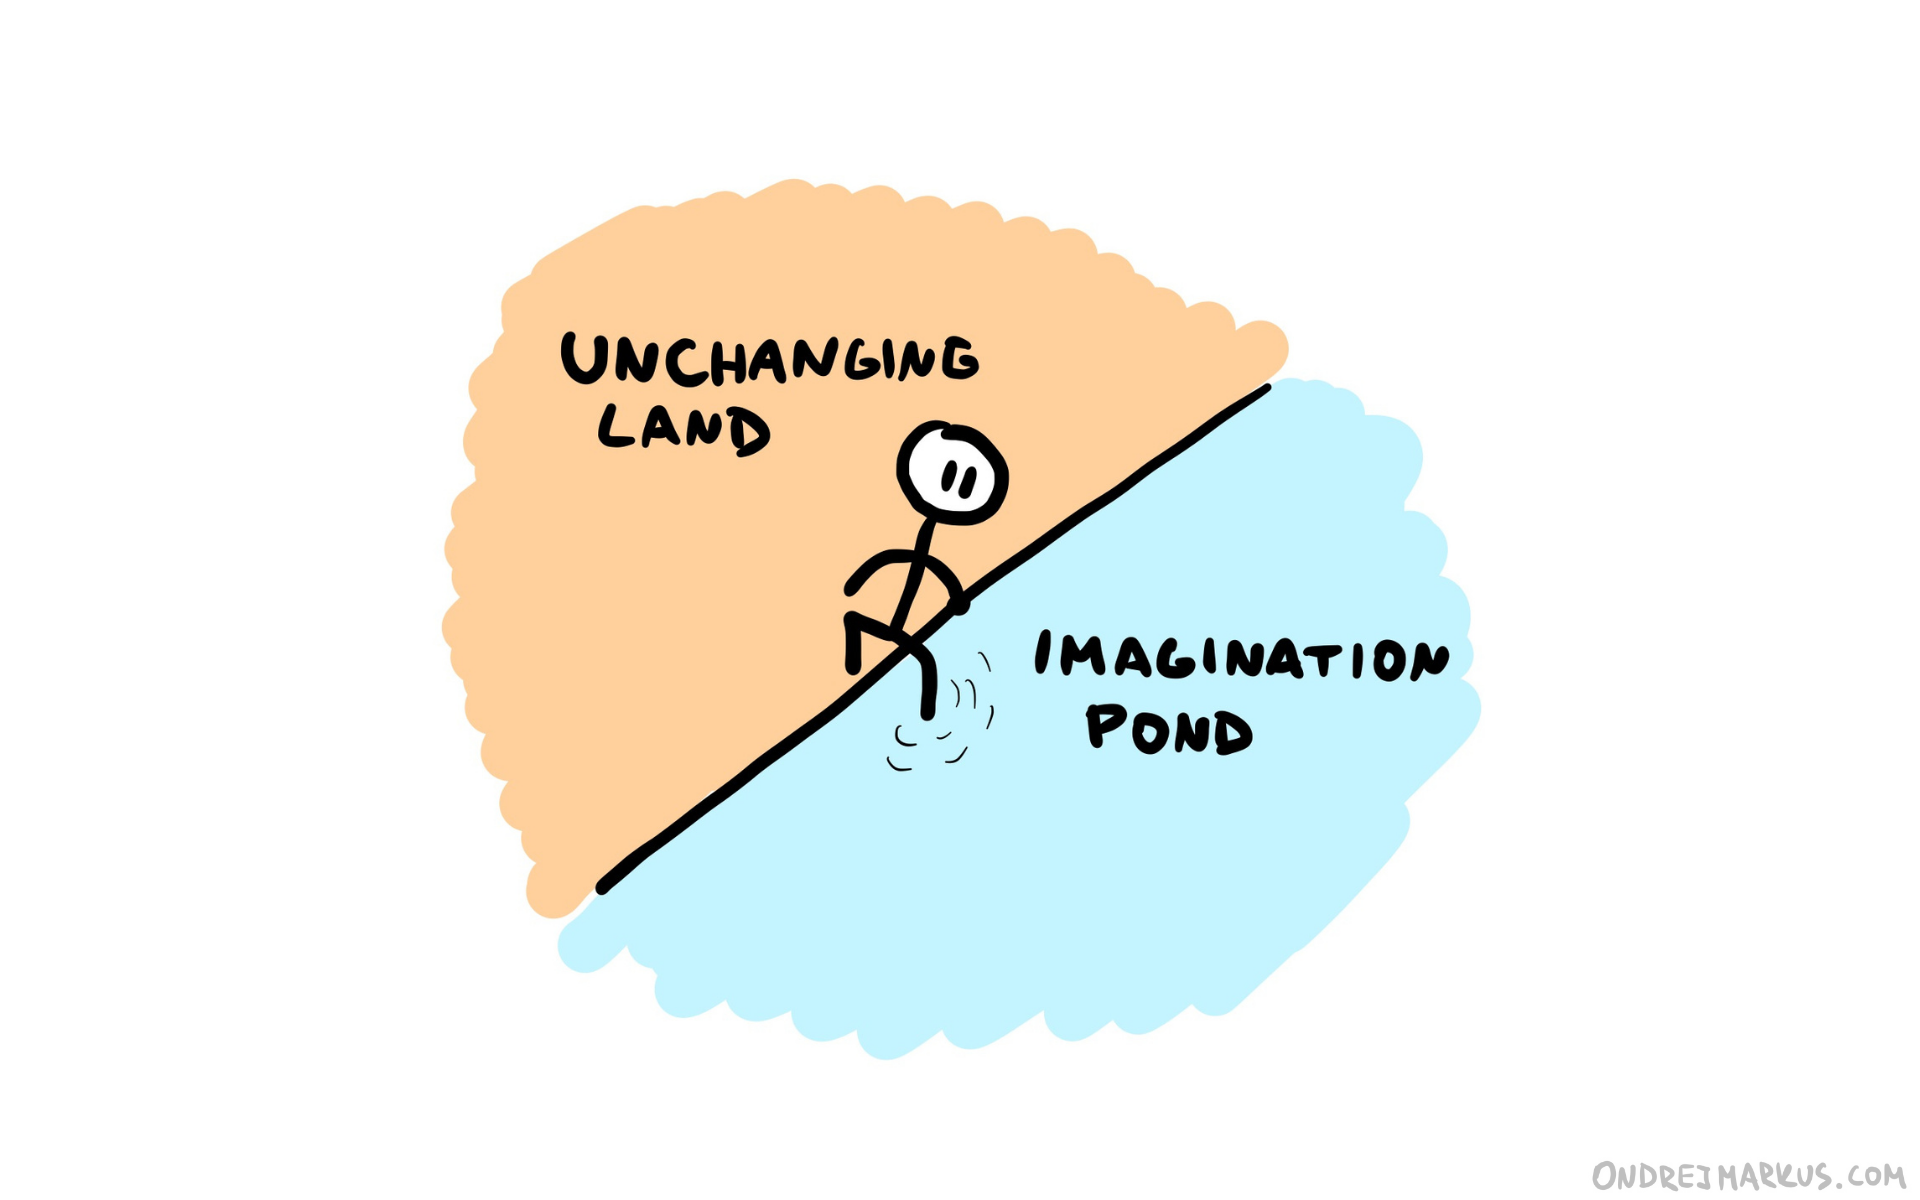 Step into the Imagination pond